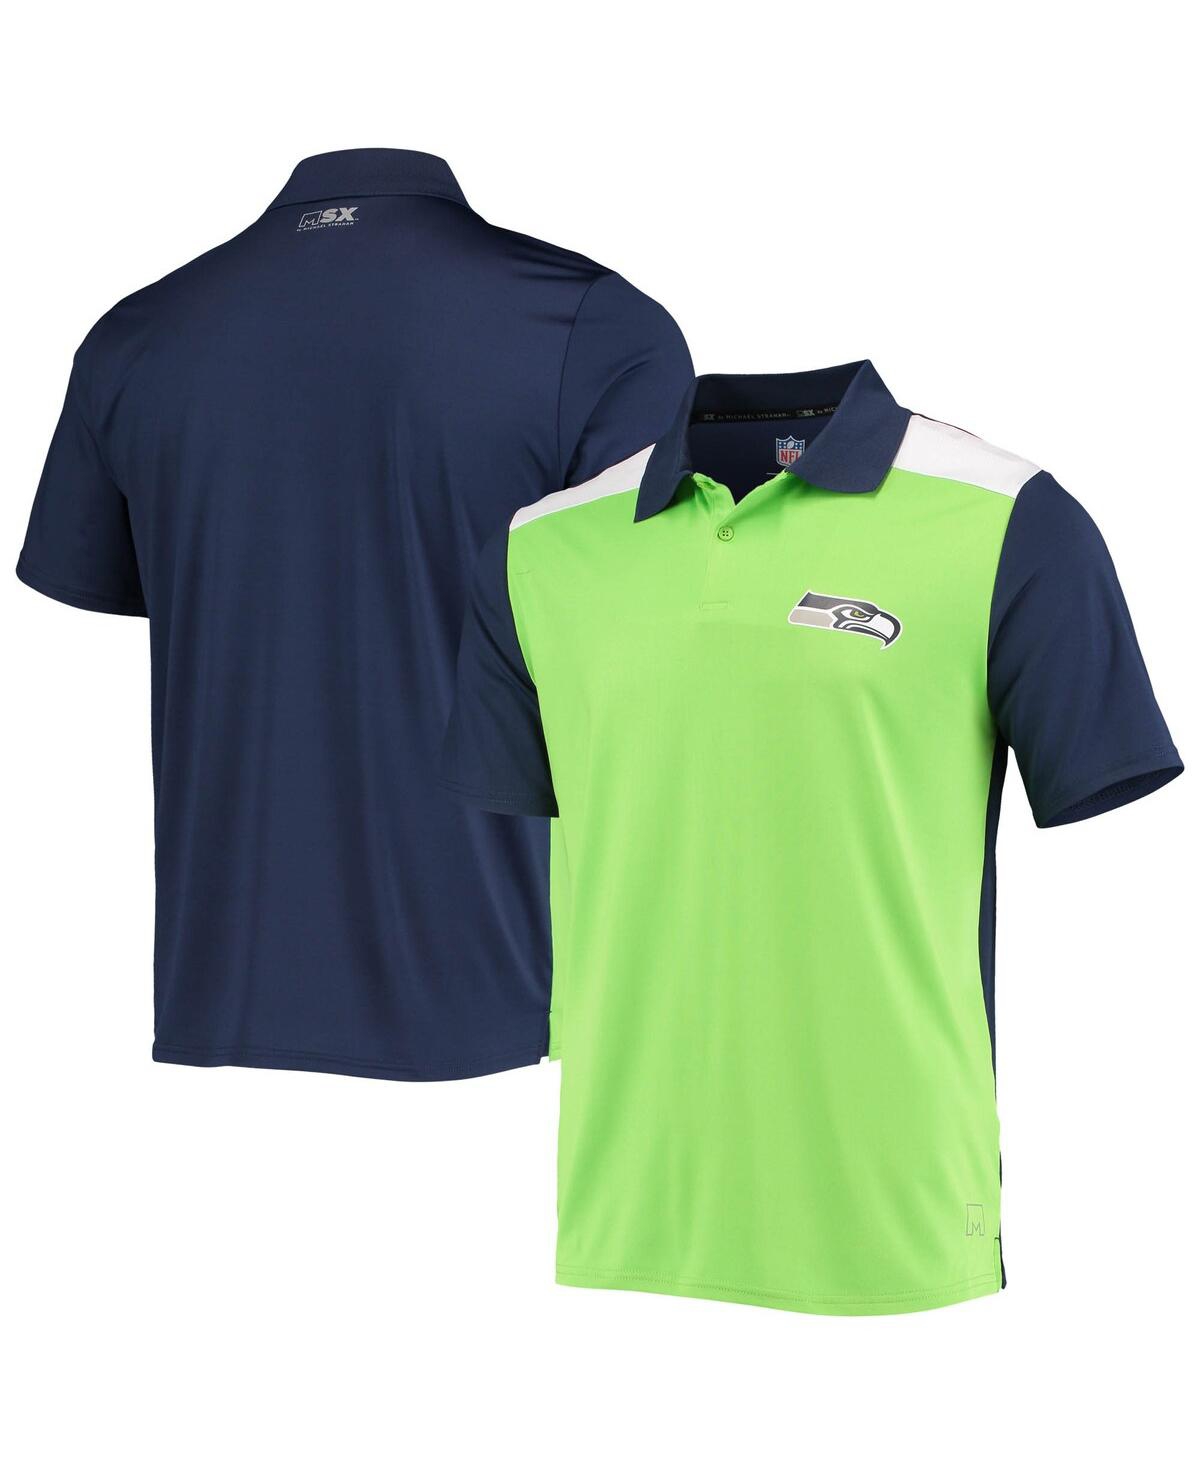 Men's Msx by Michael Strahan Neon Green, College Navy Seattle Seahawks Challenge Color Block Performance Polo Shirt - Neon Green, College Navy